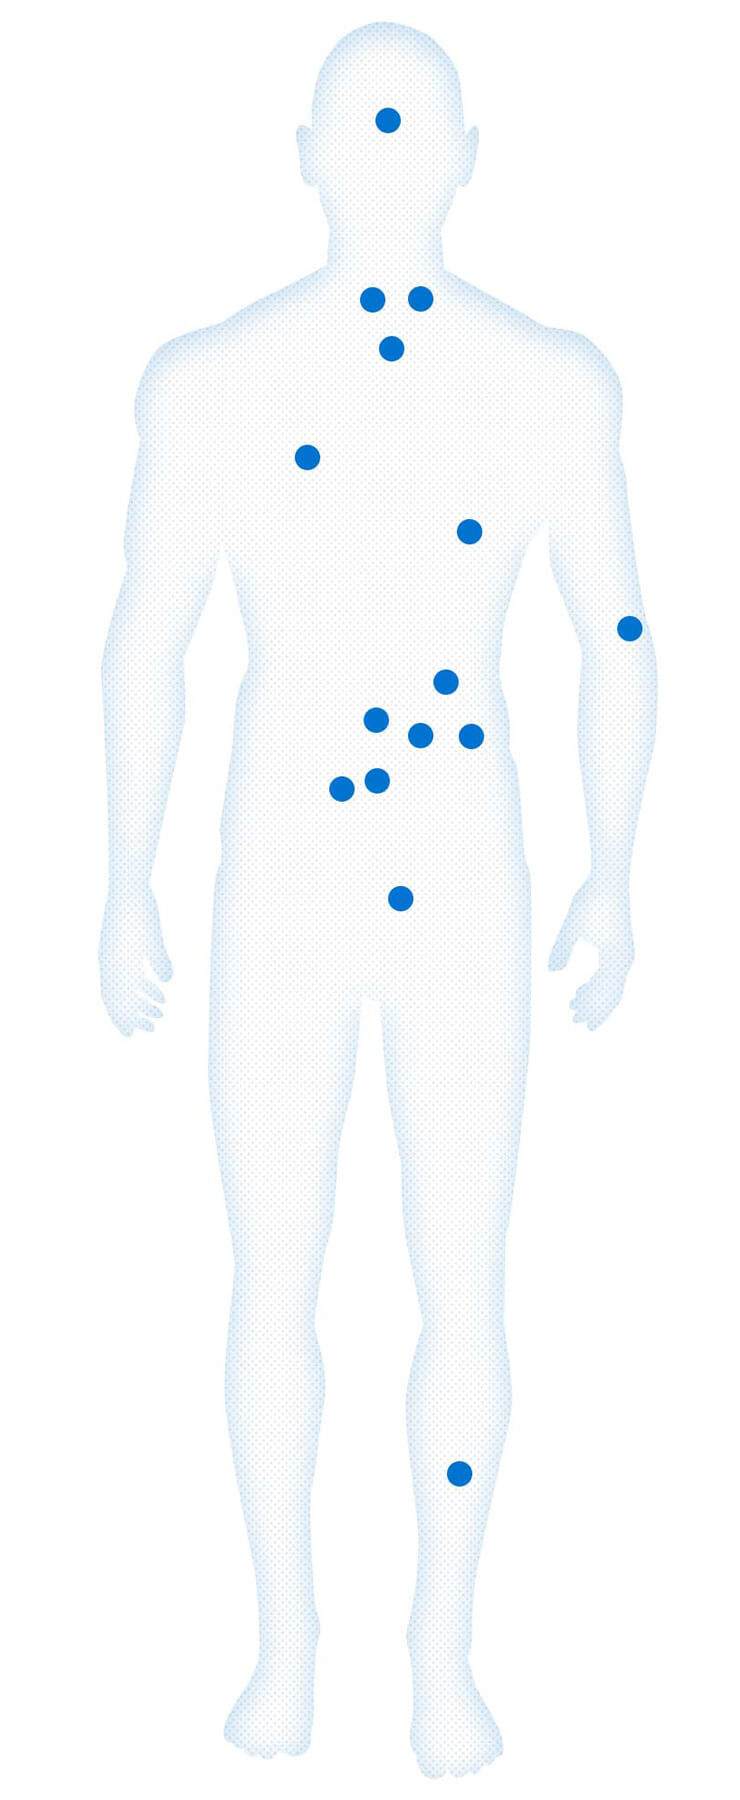 Outline of Male Body